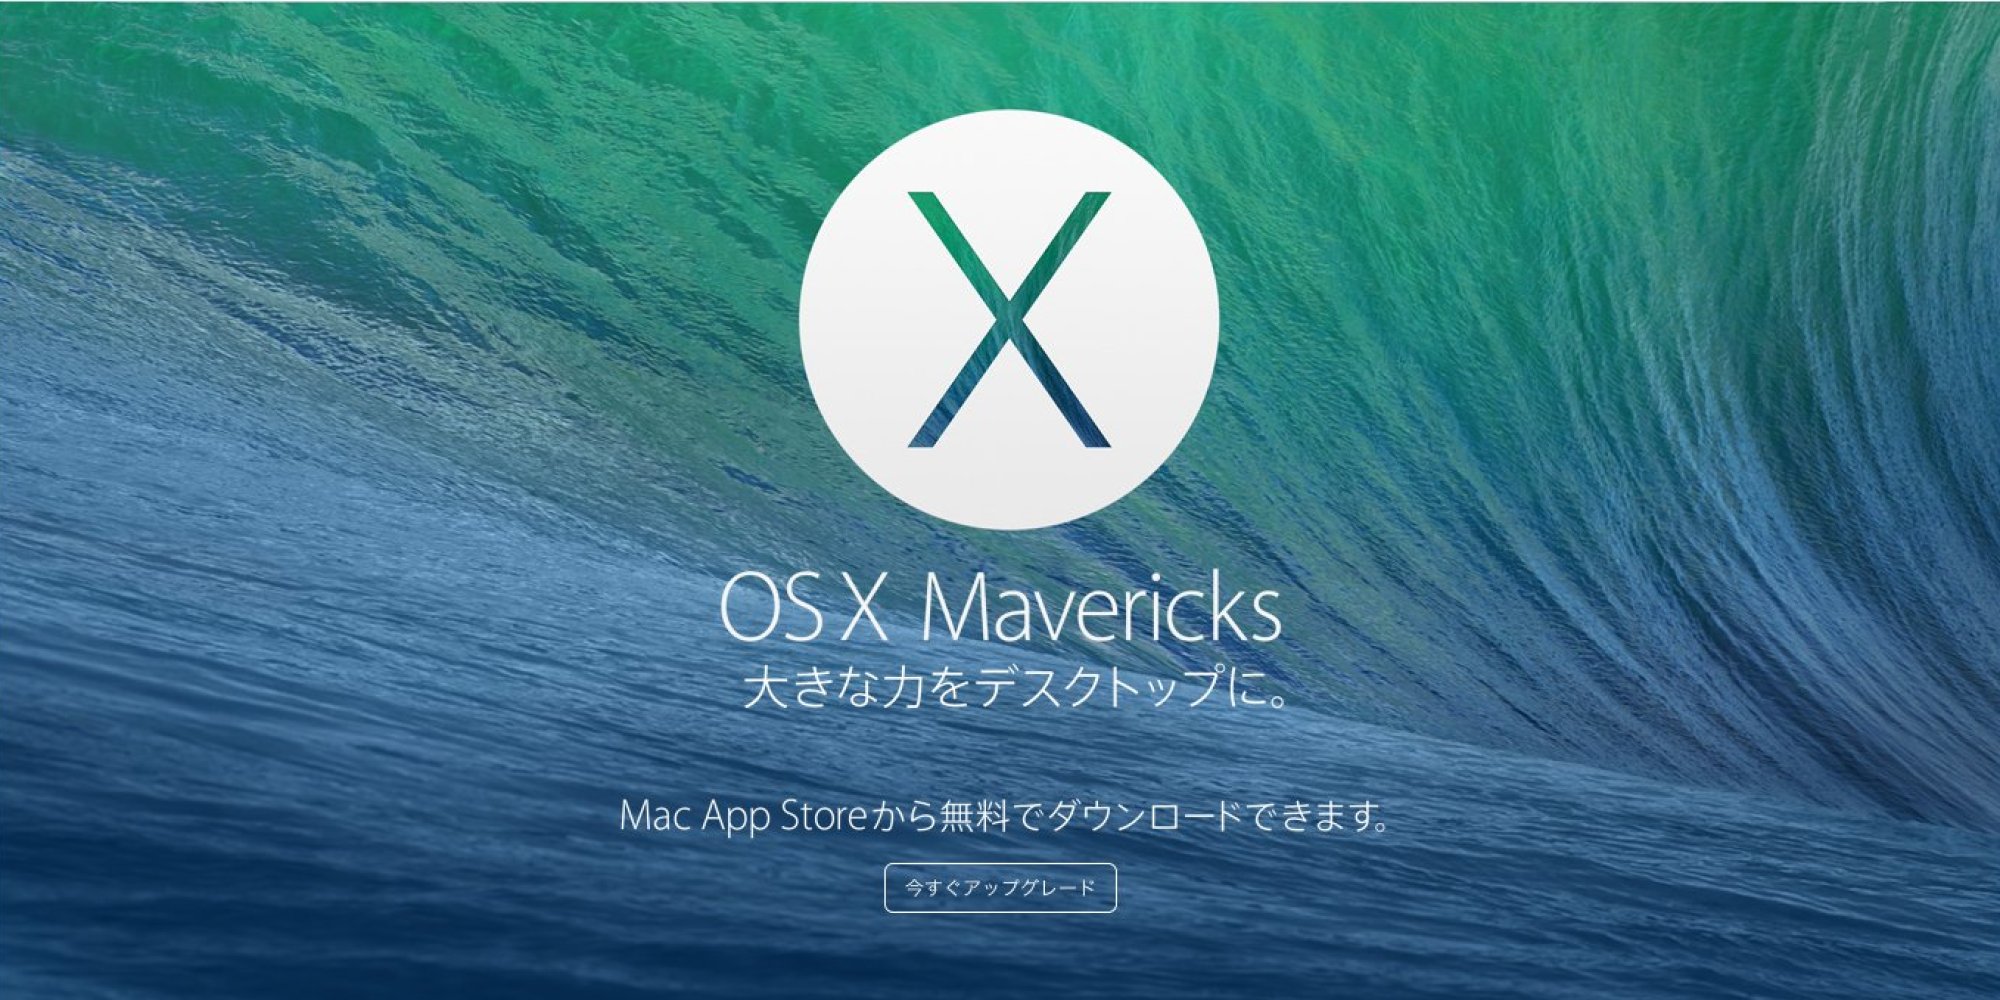 Apple Released Its Seventh Developer Pre Of Os X